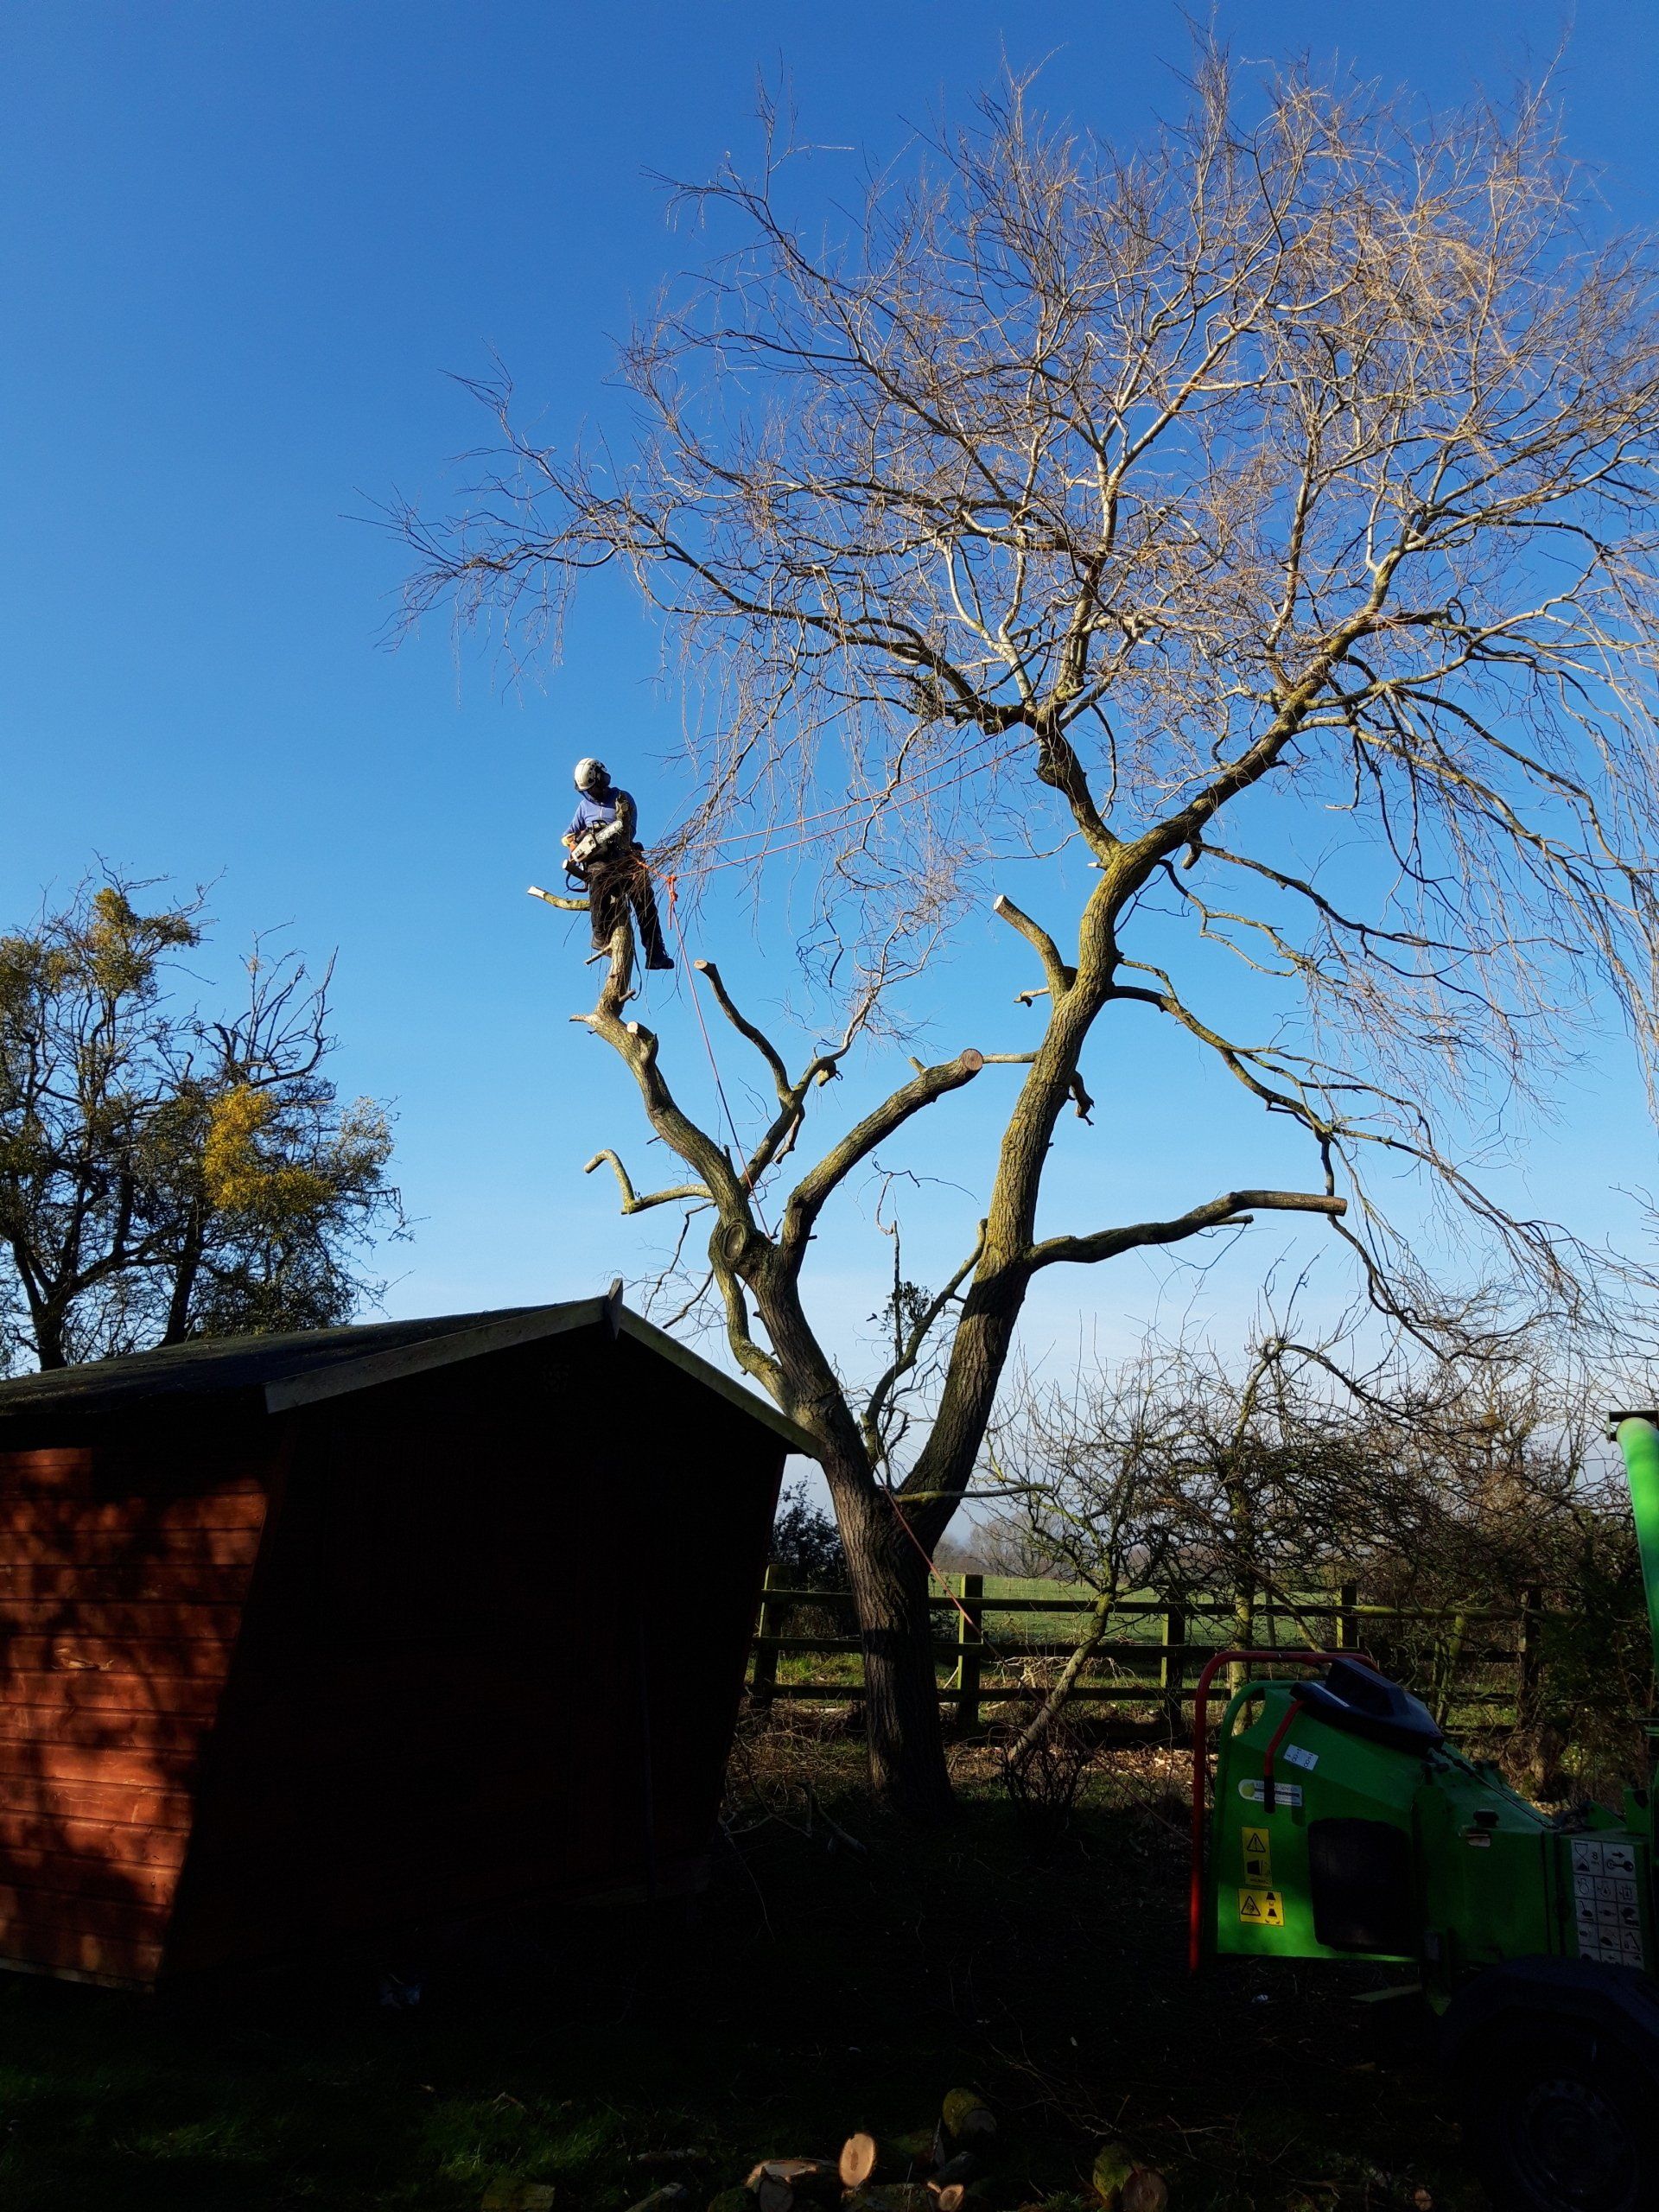 Out tree surgery includes Crown reduction, reshaping, thinning and lifting